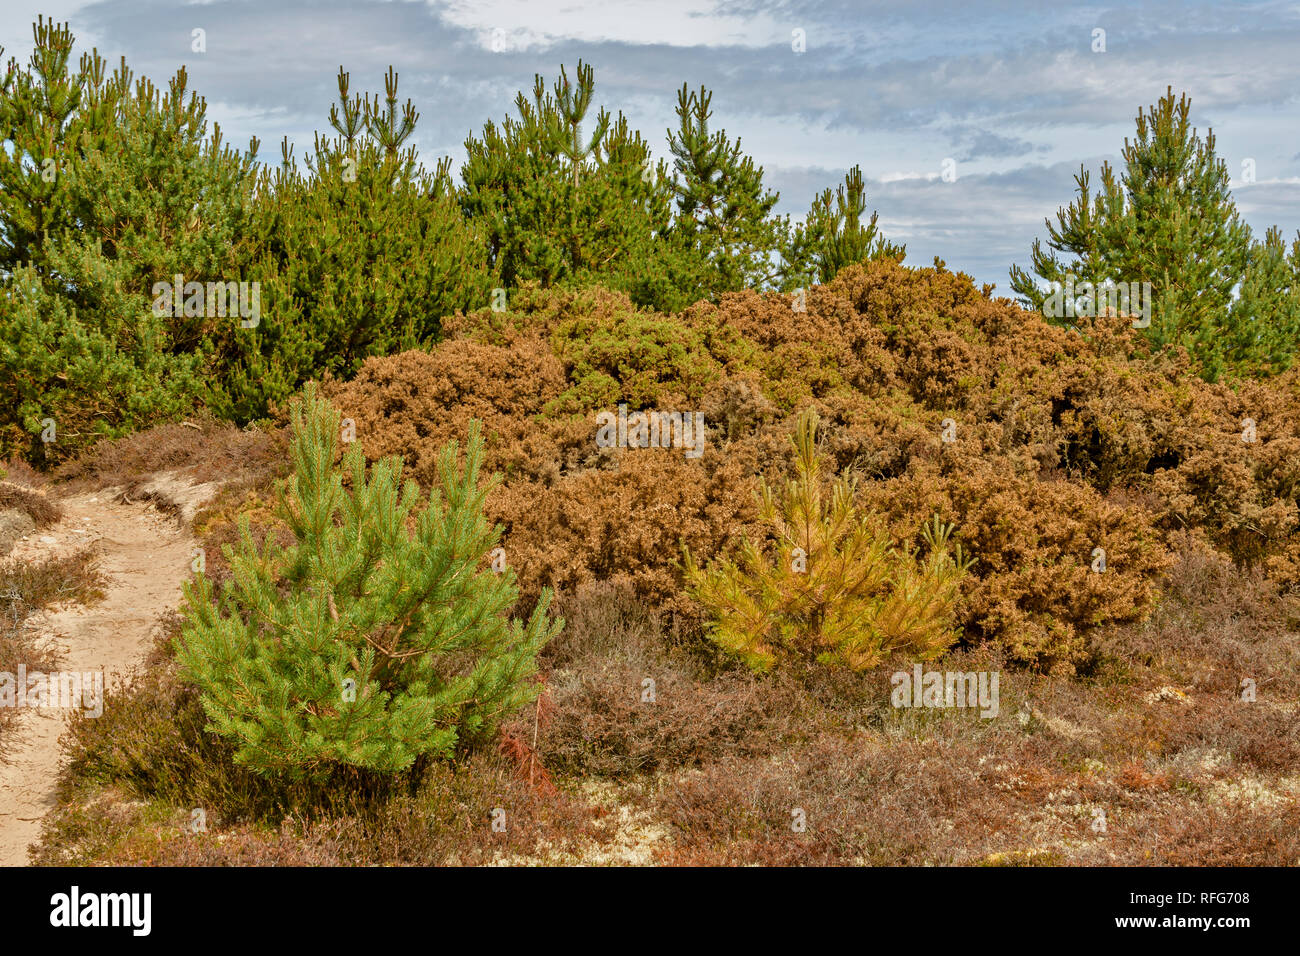 FINDHORN MORAY COAST SCOTLAND DEAD DYING GORSE AND FIR TREES DUE TO LACK OF WATER OR RAINFALL SUMMER 2018 Stock Photo